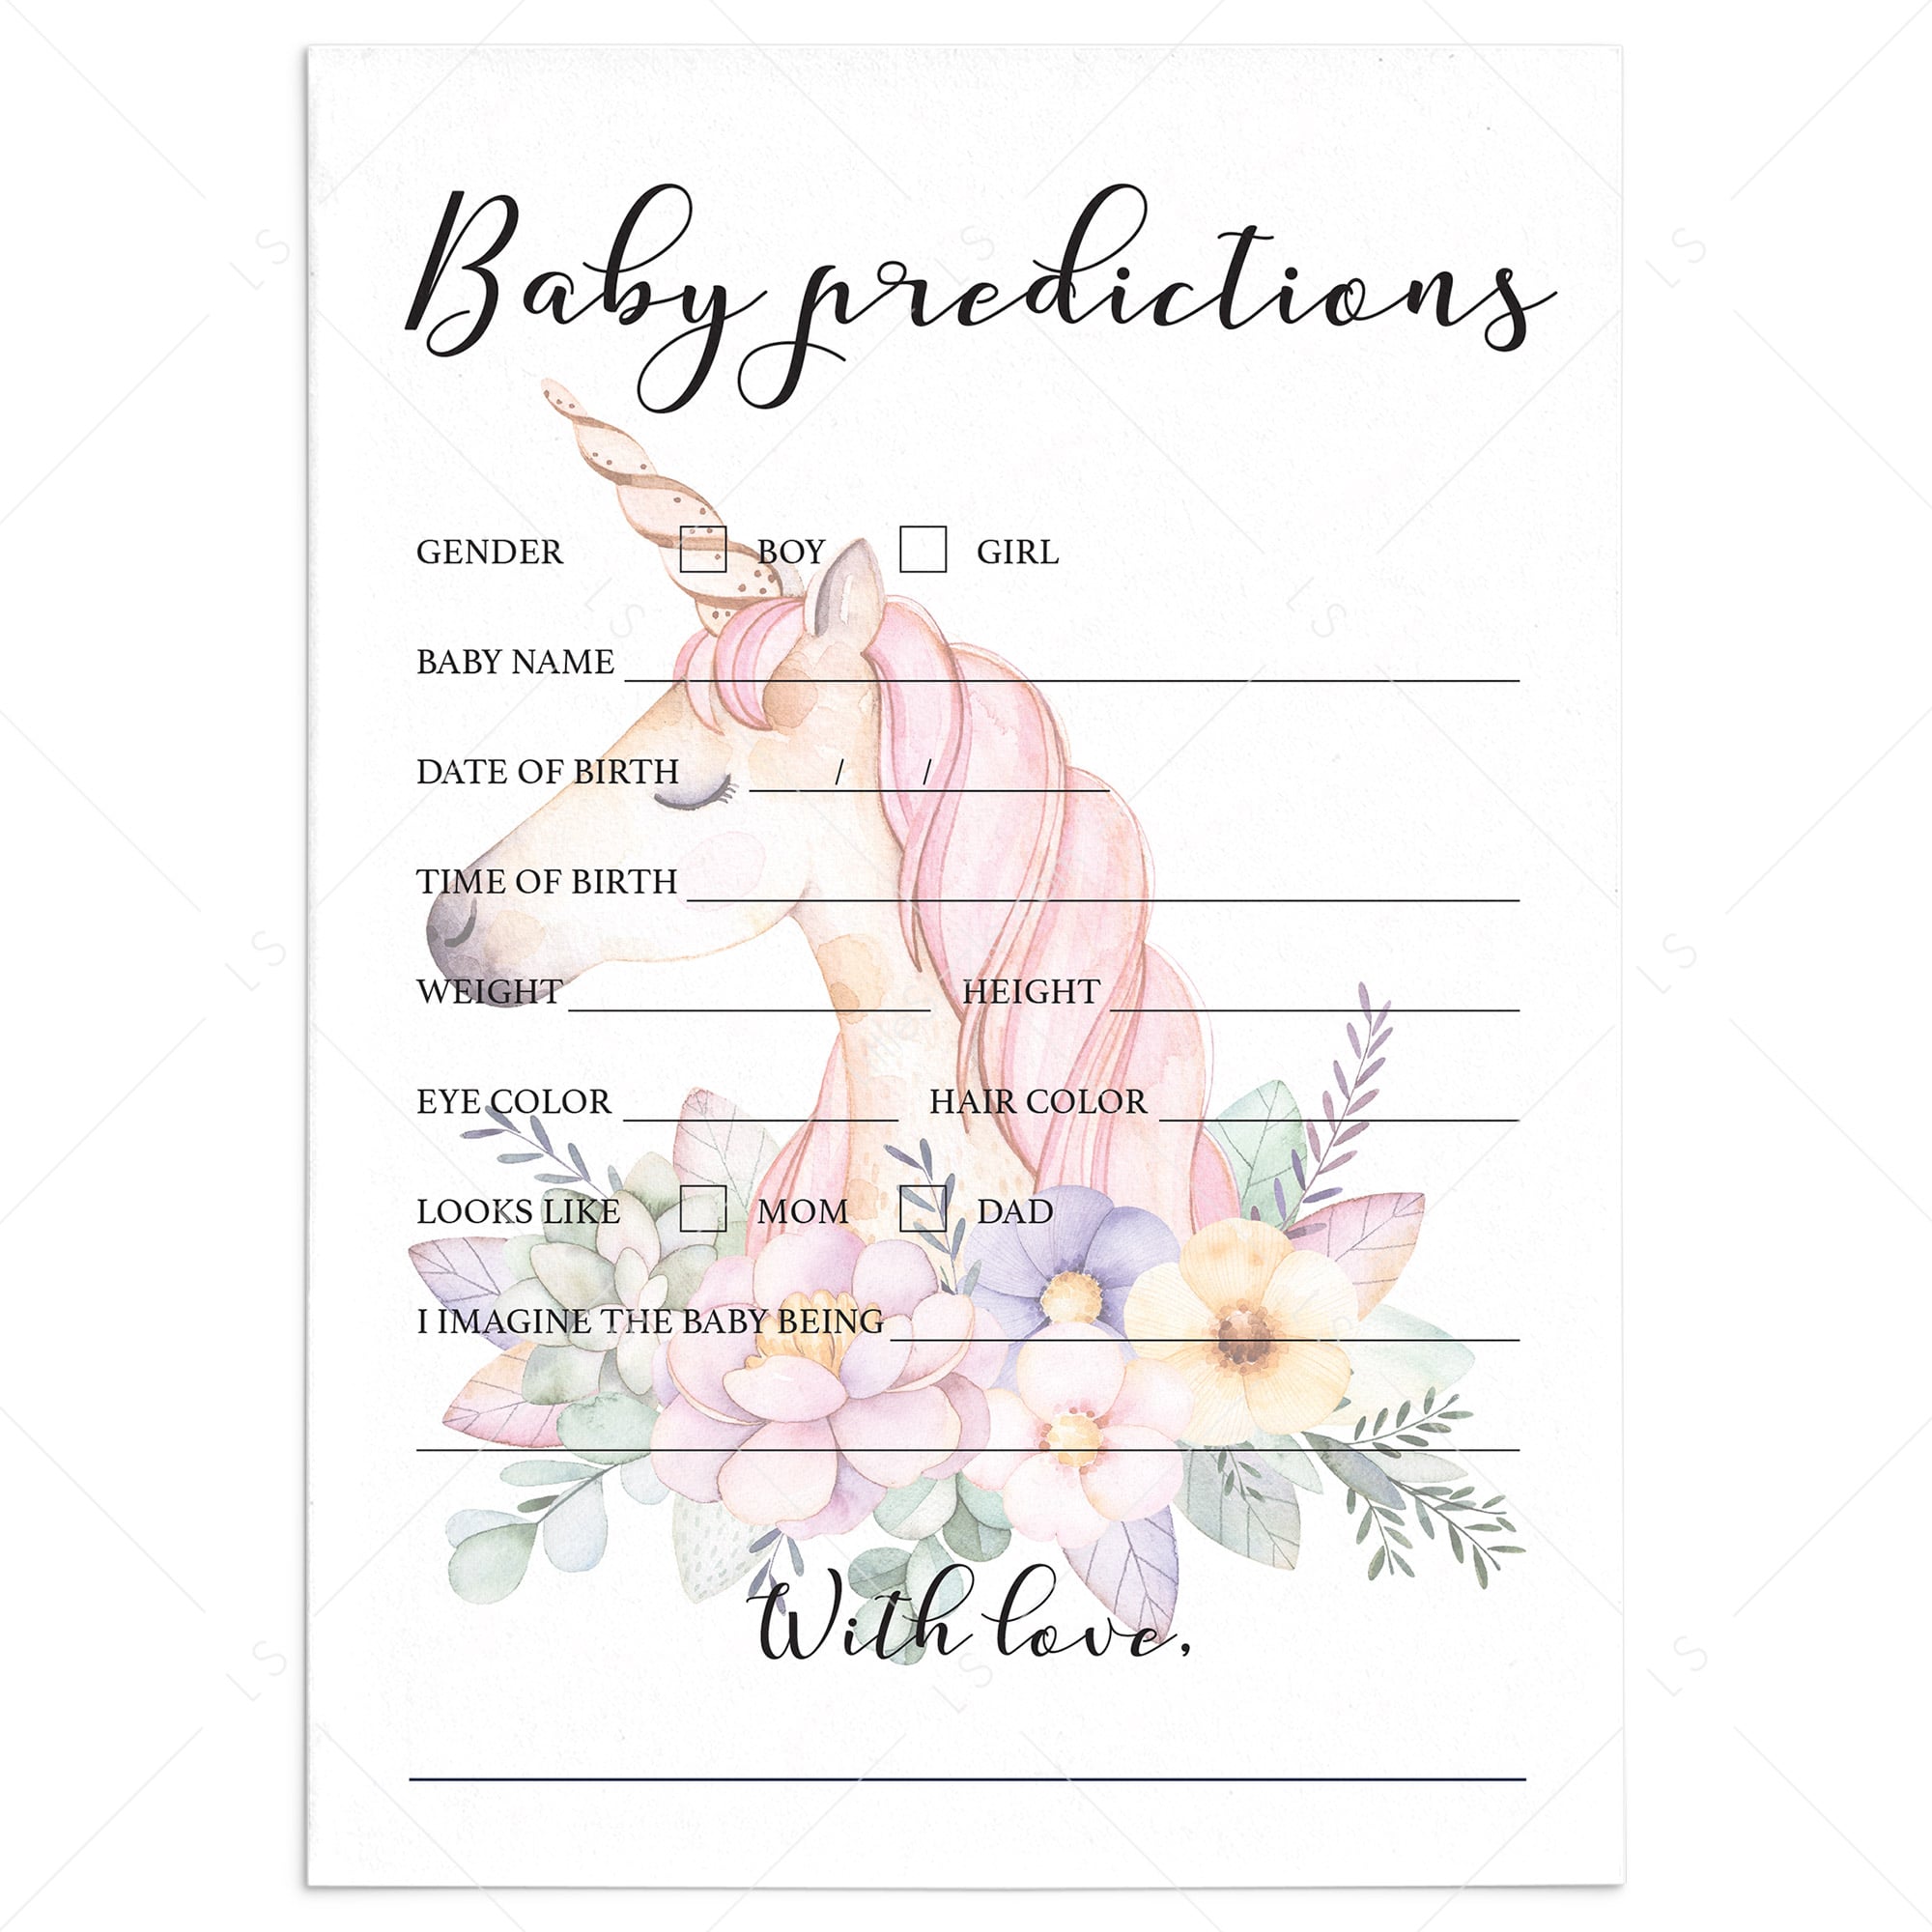 Predictions for baby game for unicorn themed party by LittleSizzle